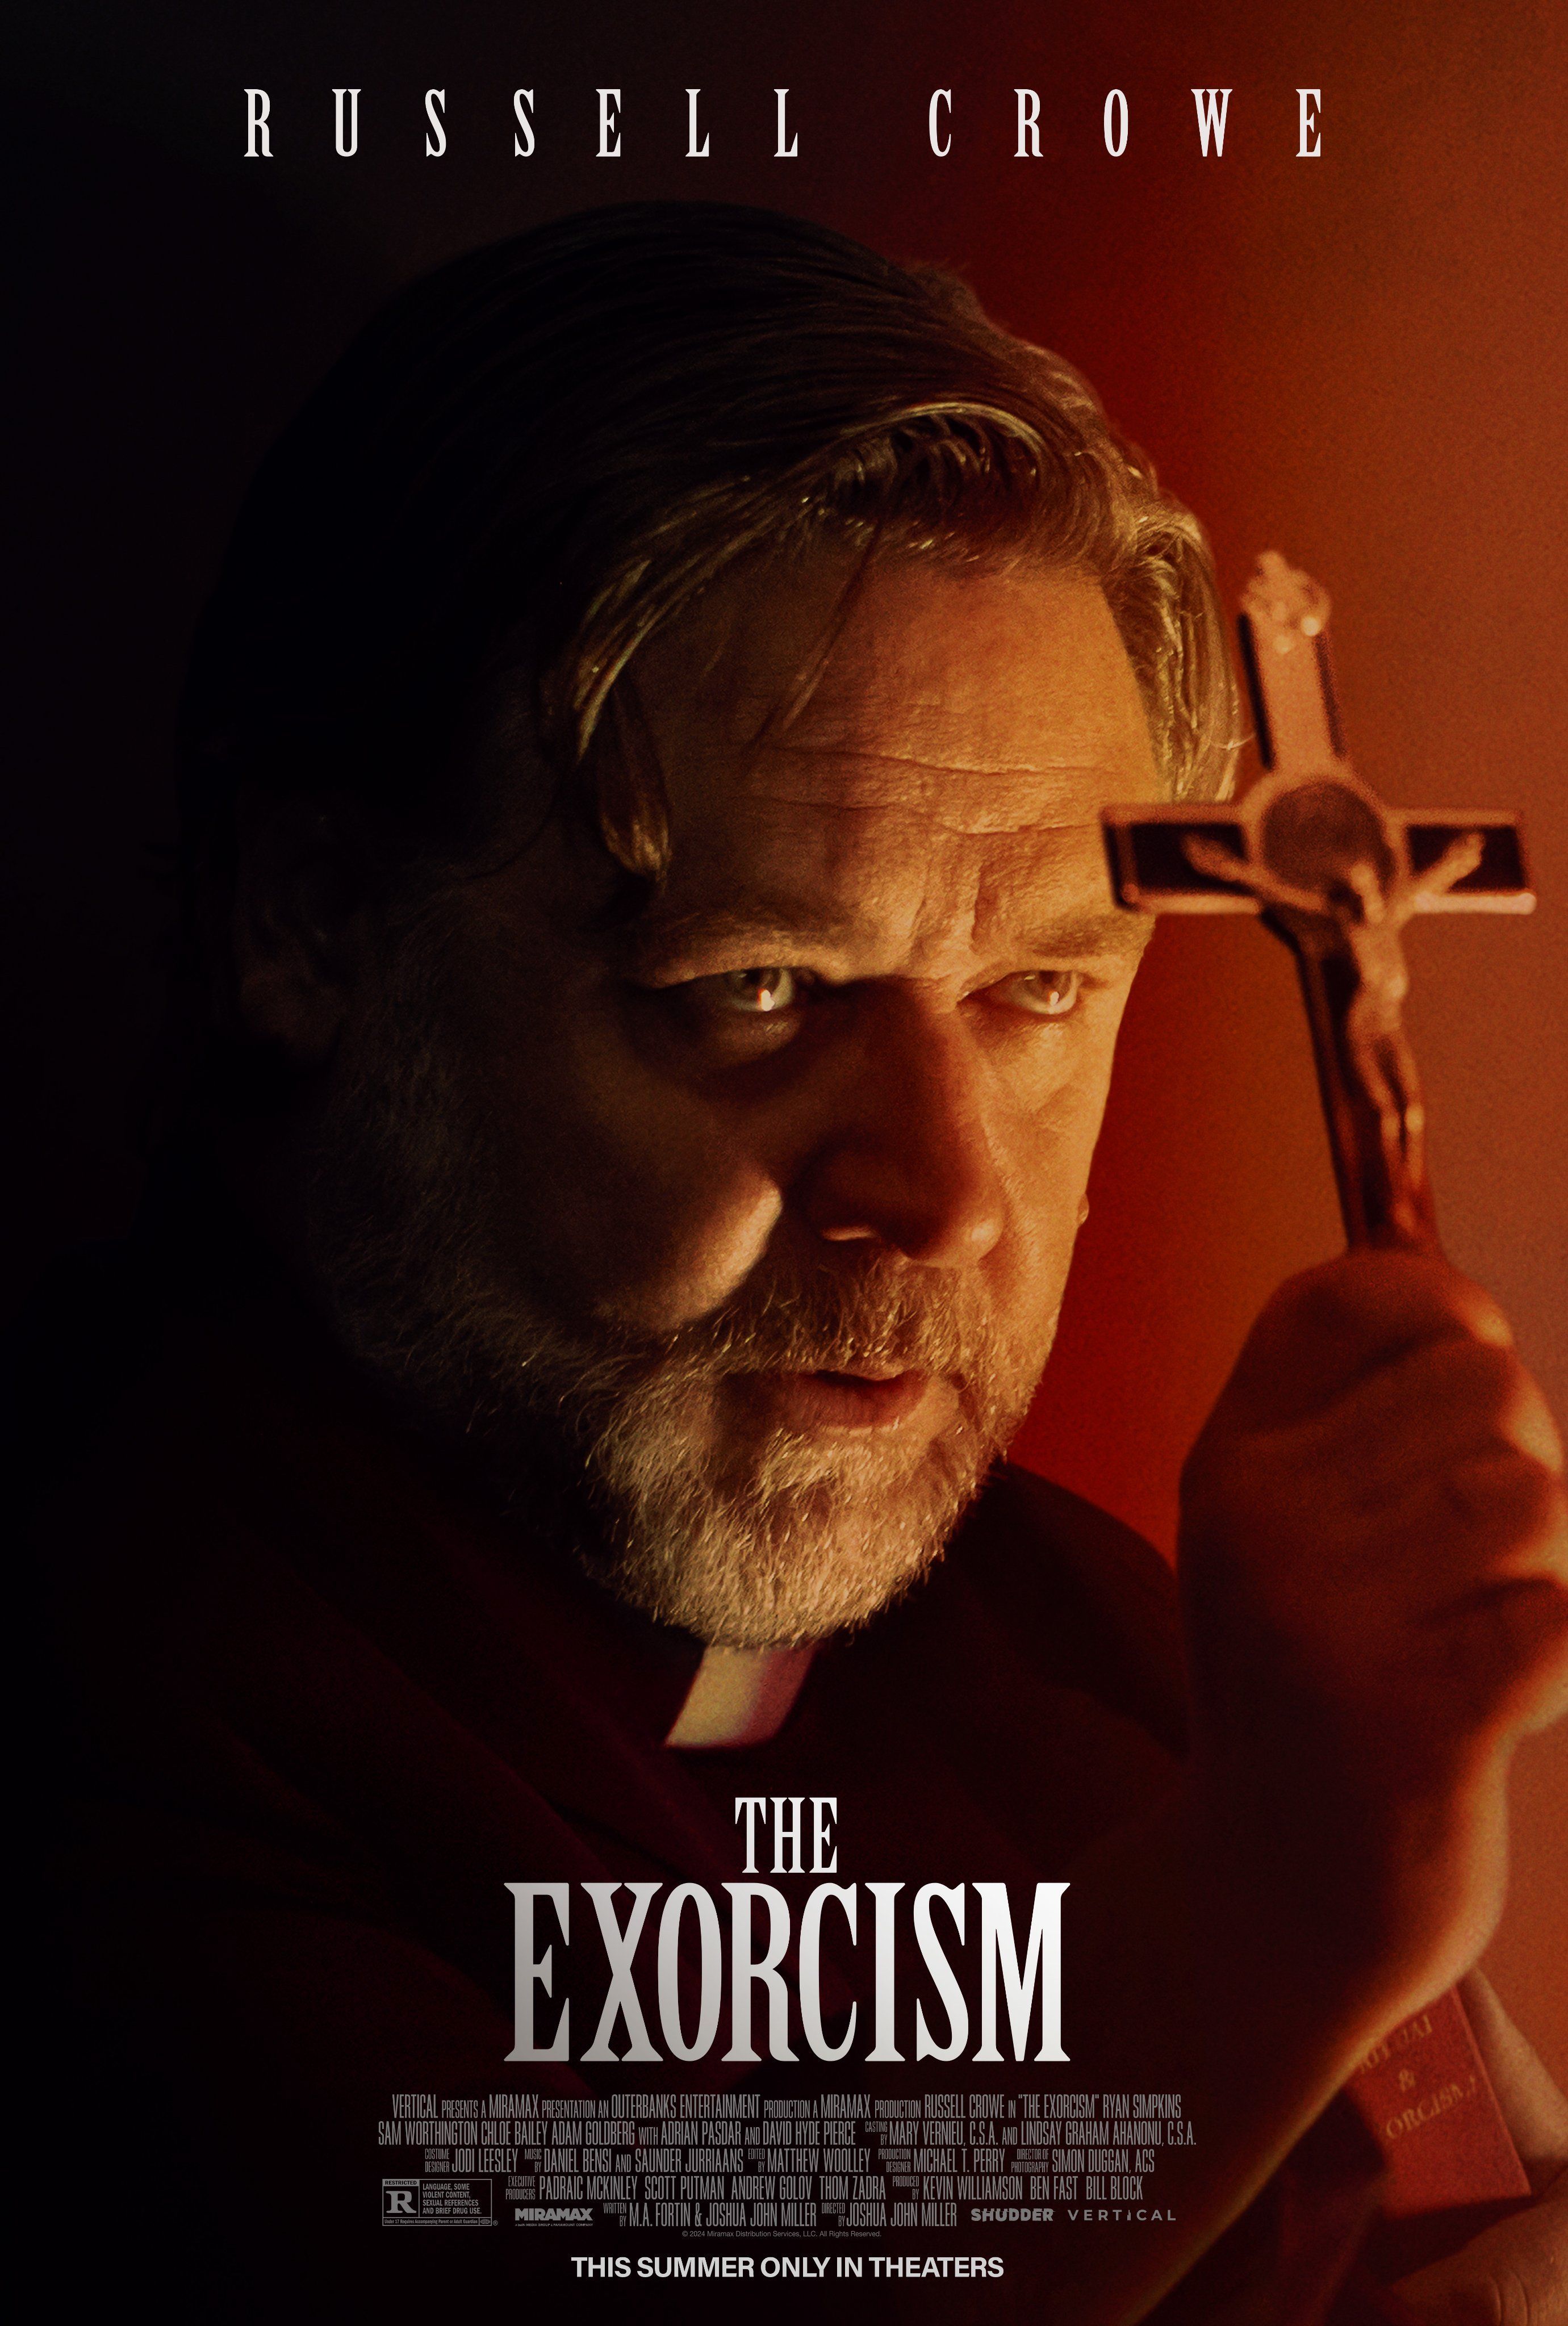 The first poster for Russell Crowe's The Exorcism.